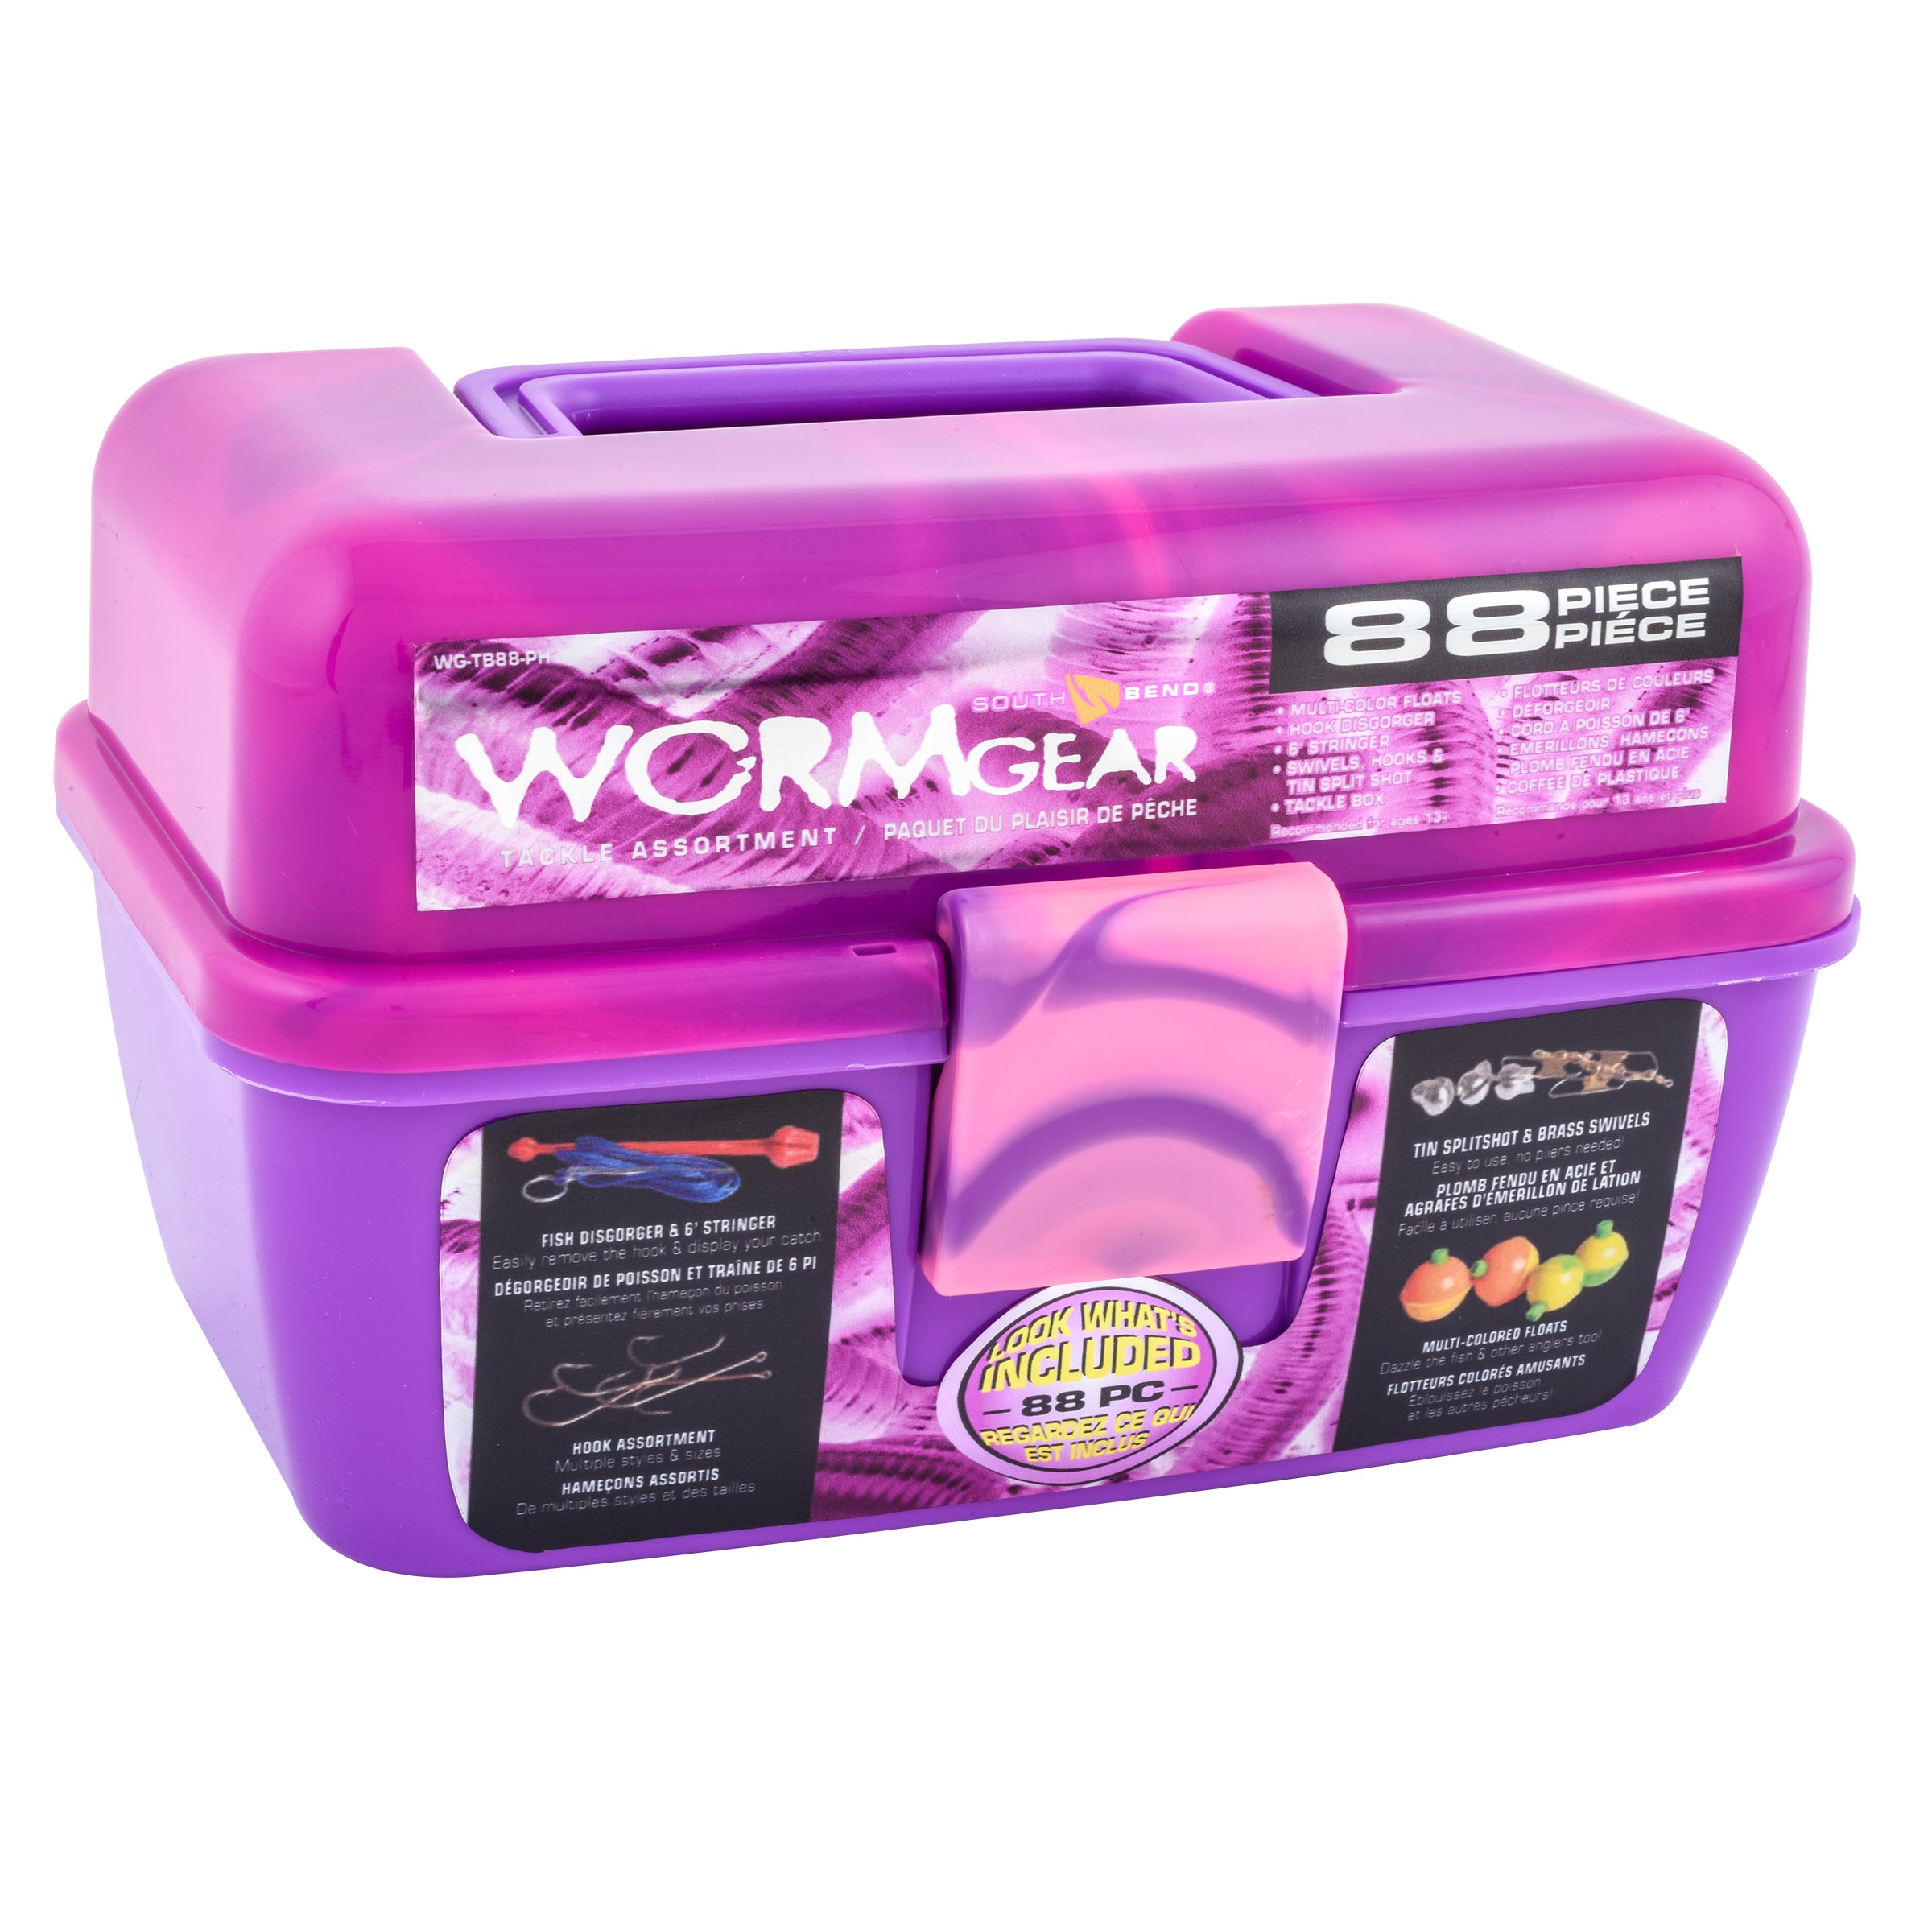 South Bend® Worm Gear Loaded Tackle Box Kit - Pink, 88 pc - Jay C